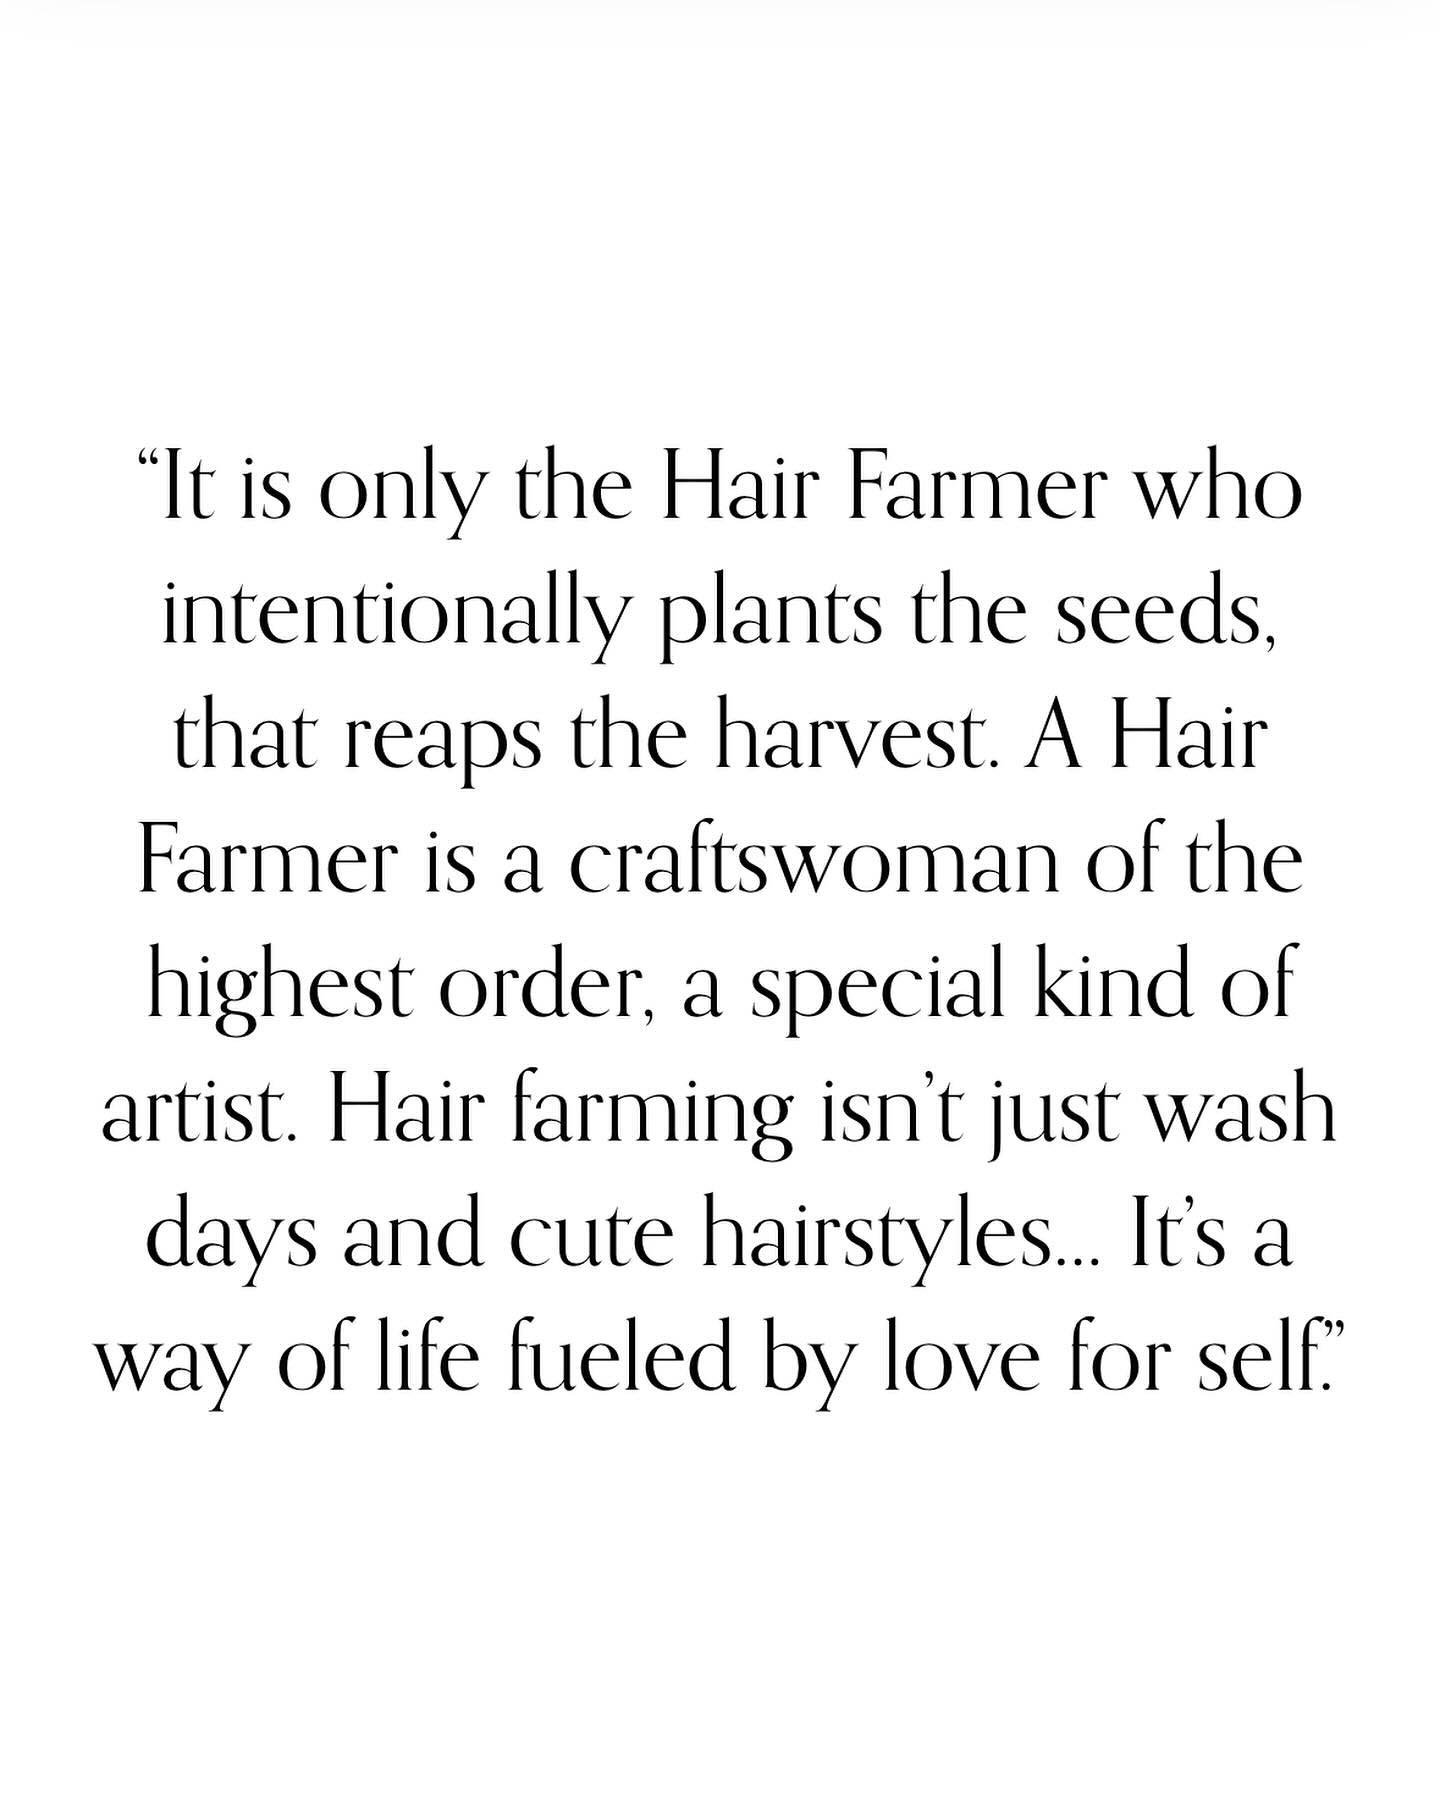 First it gets thick, then comes the length. Make your way to the hair farm 🗣️👩🏾&zwj;🌾 
.
.
.
.
.
.
.
.
.
#silkpress #hair #eapheat #healthyhair #azhairstylist #naturalhair #haircare #phoenixhairstylist #glendalehairstylist #blackhair #thehairfarm